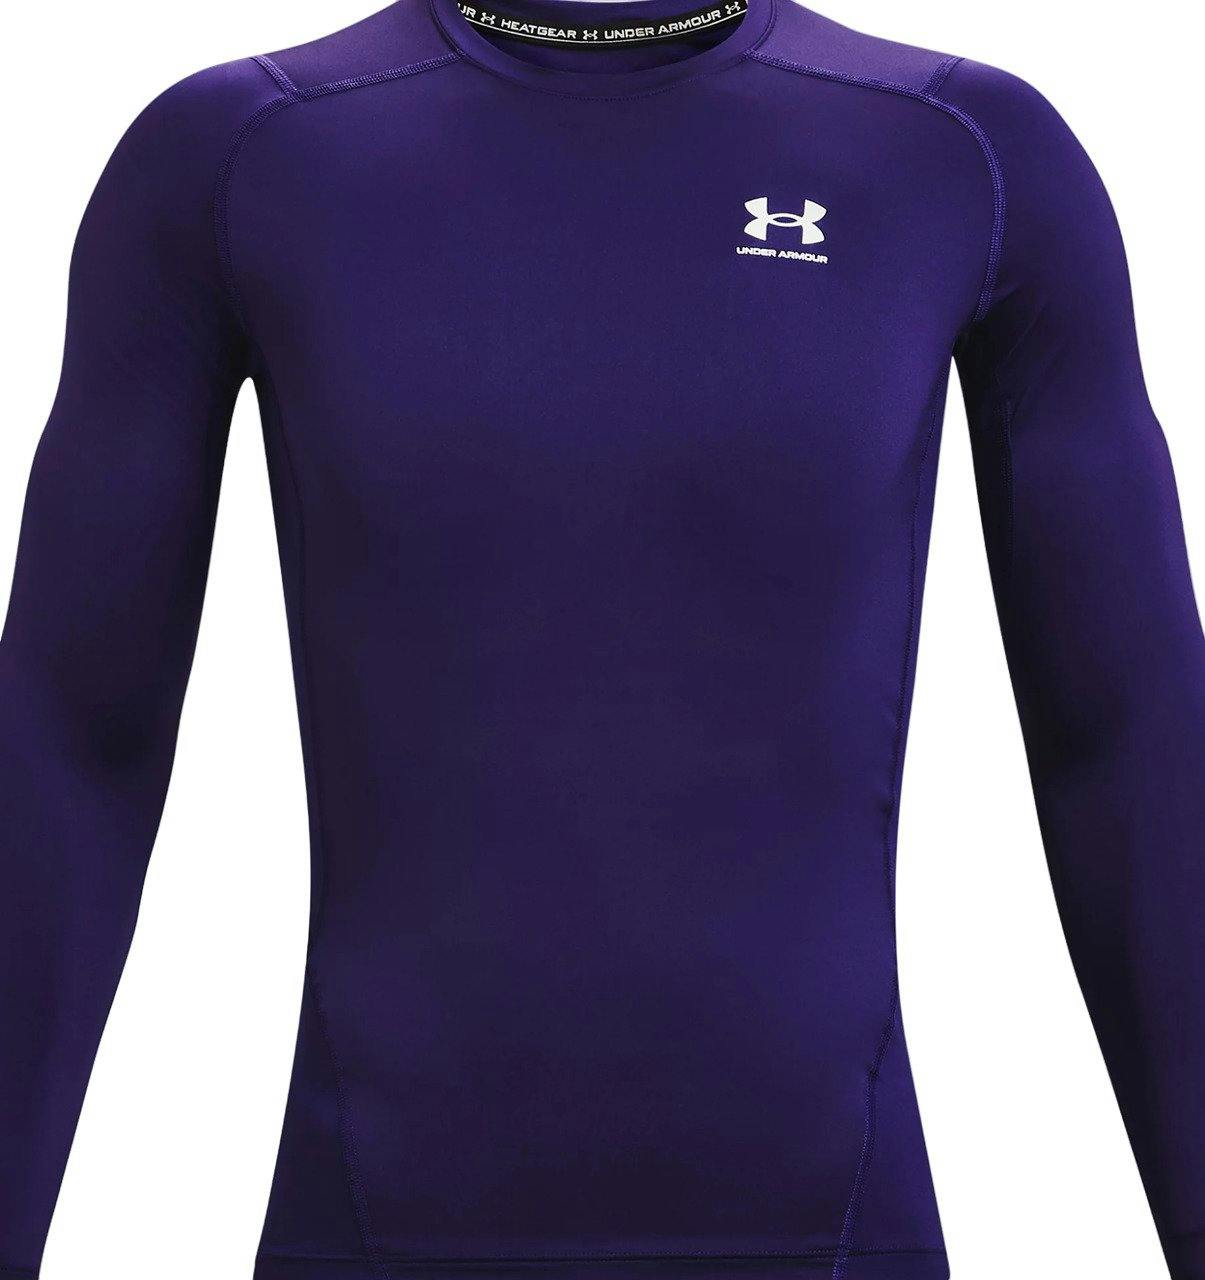 Product image for HeatGear Armour Long Sleeve Baselayer Top - Men's